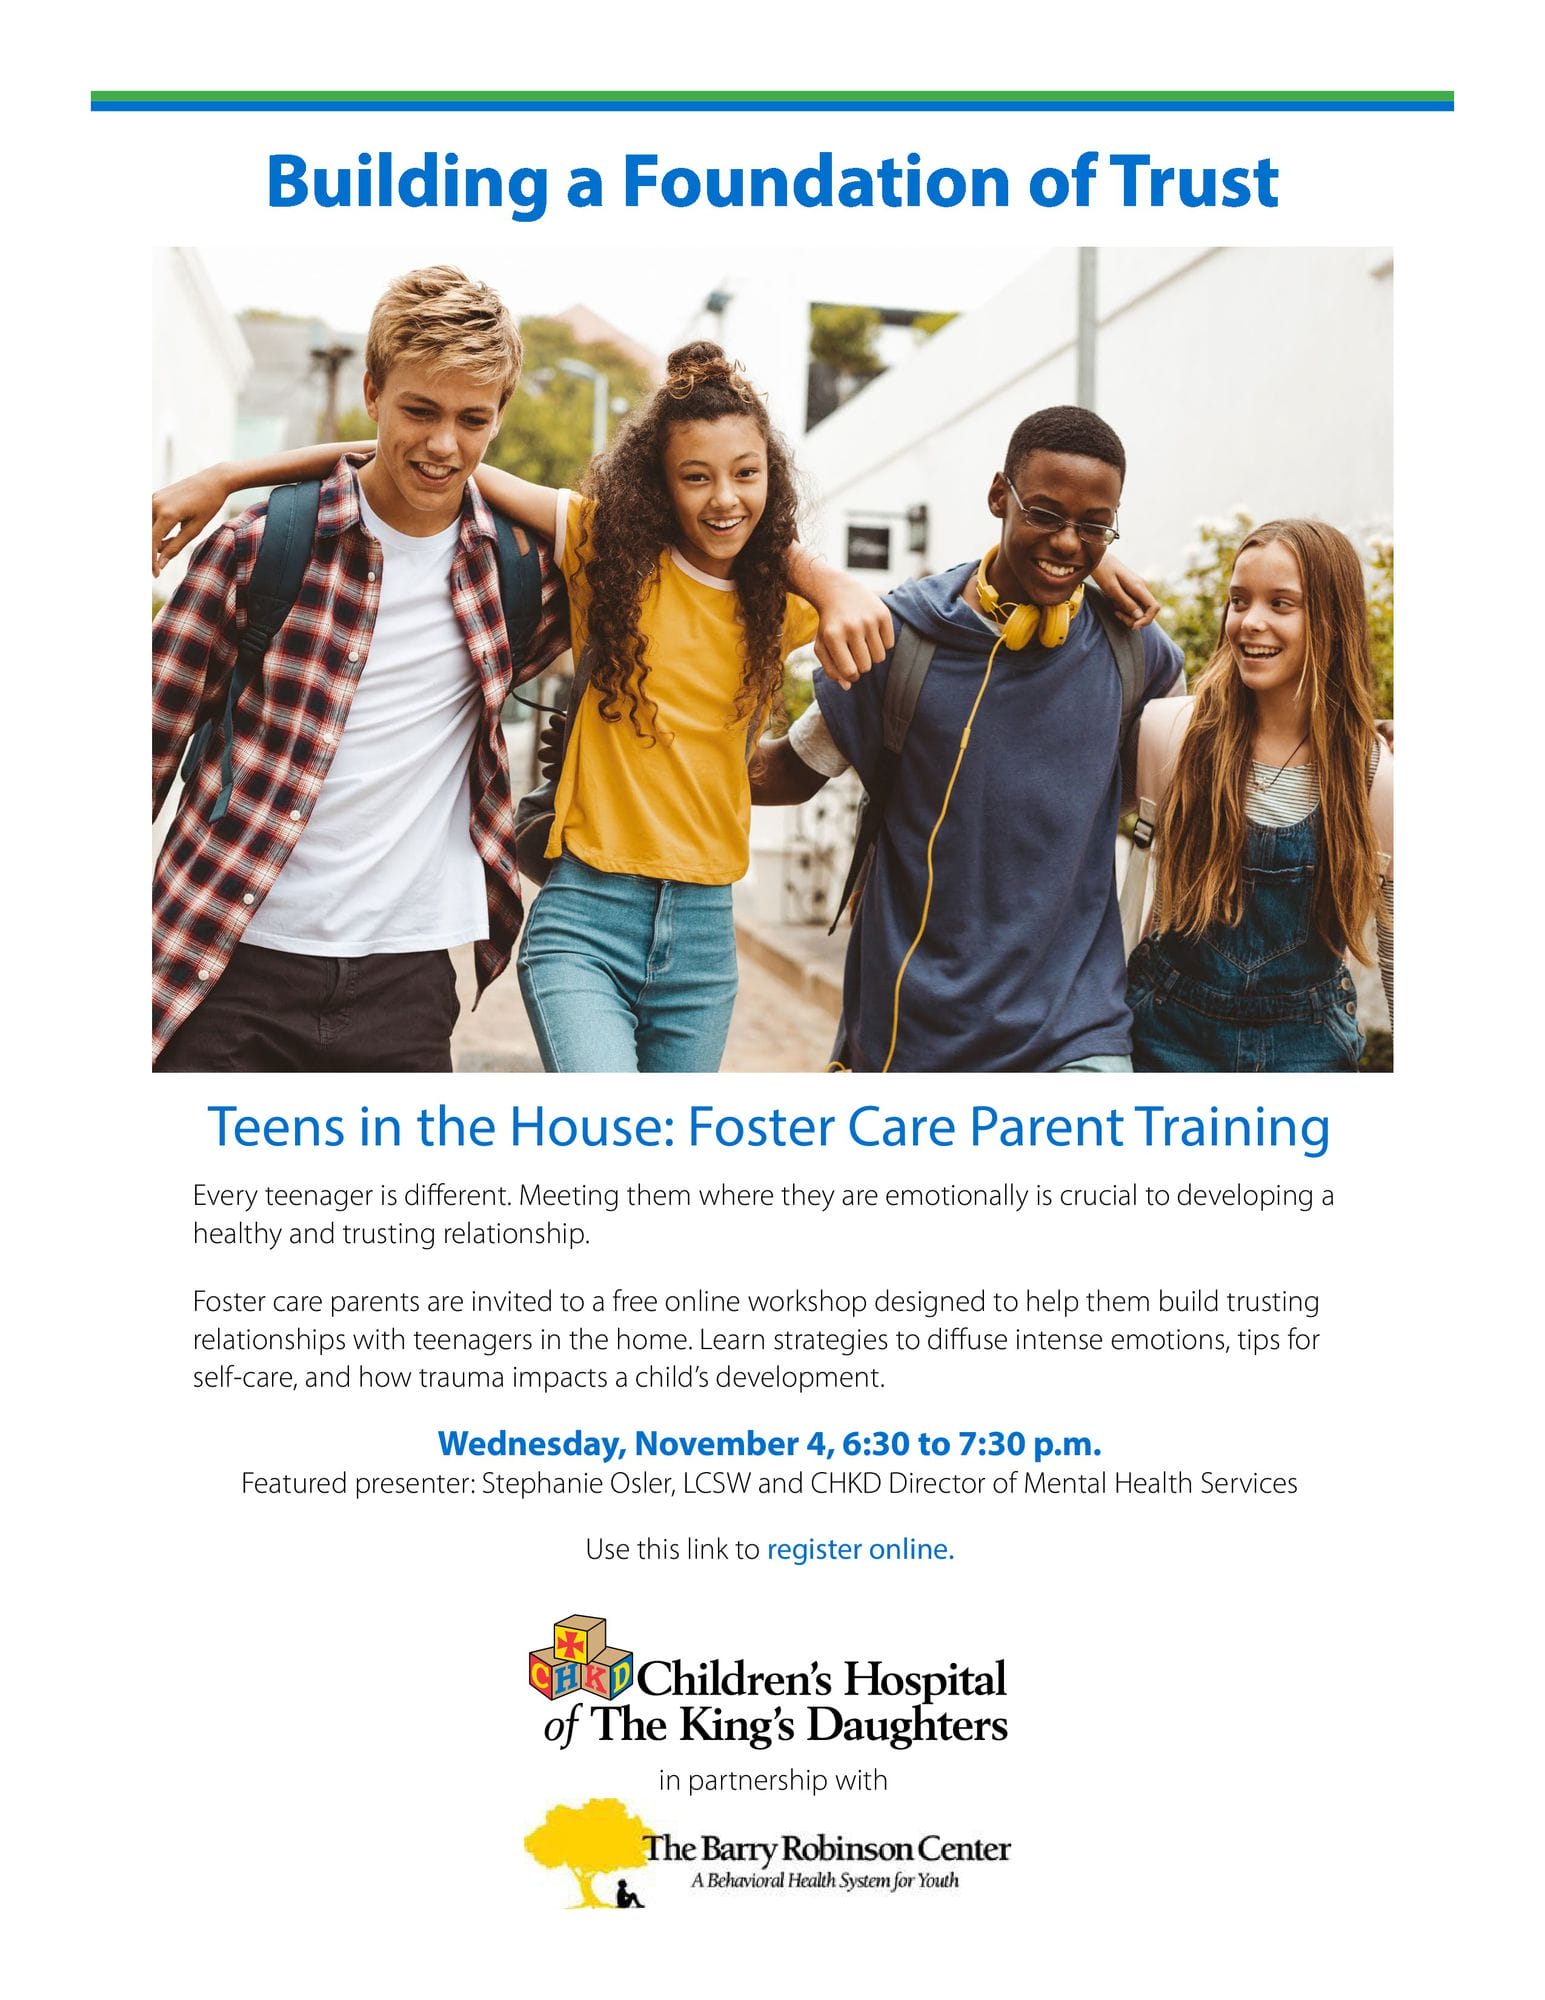 Teens in the House - Foster Parent Support